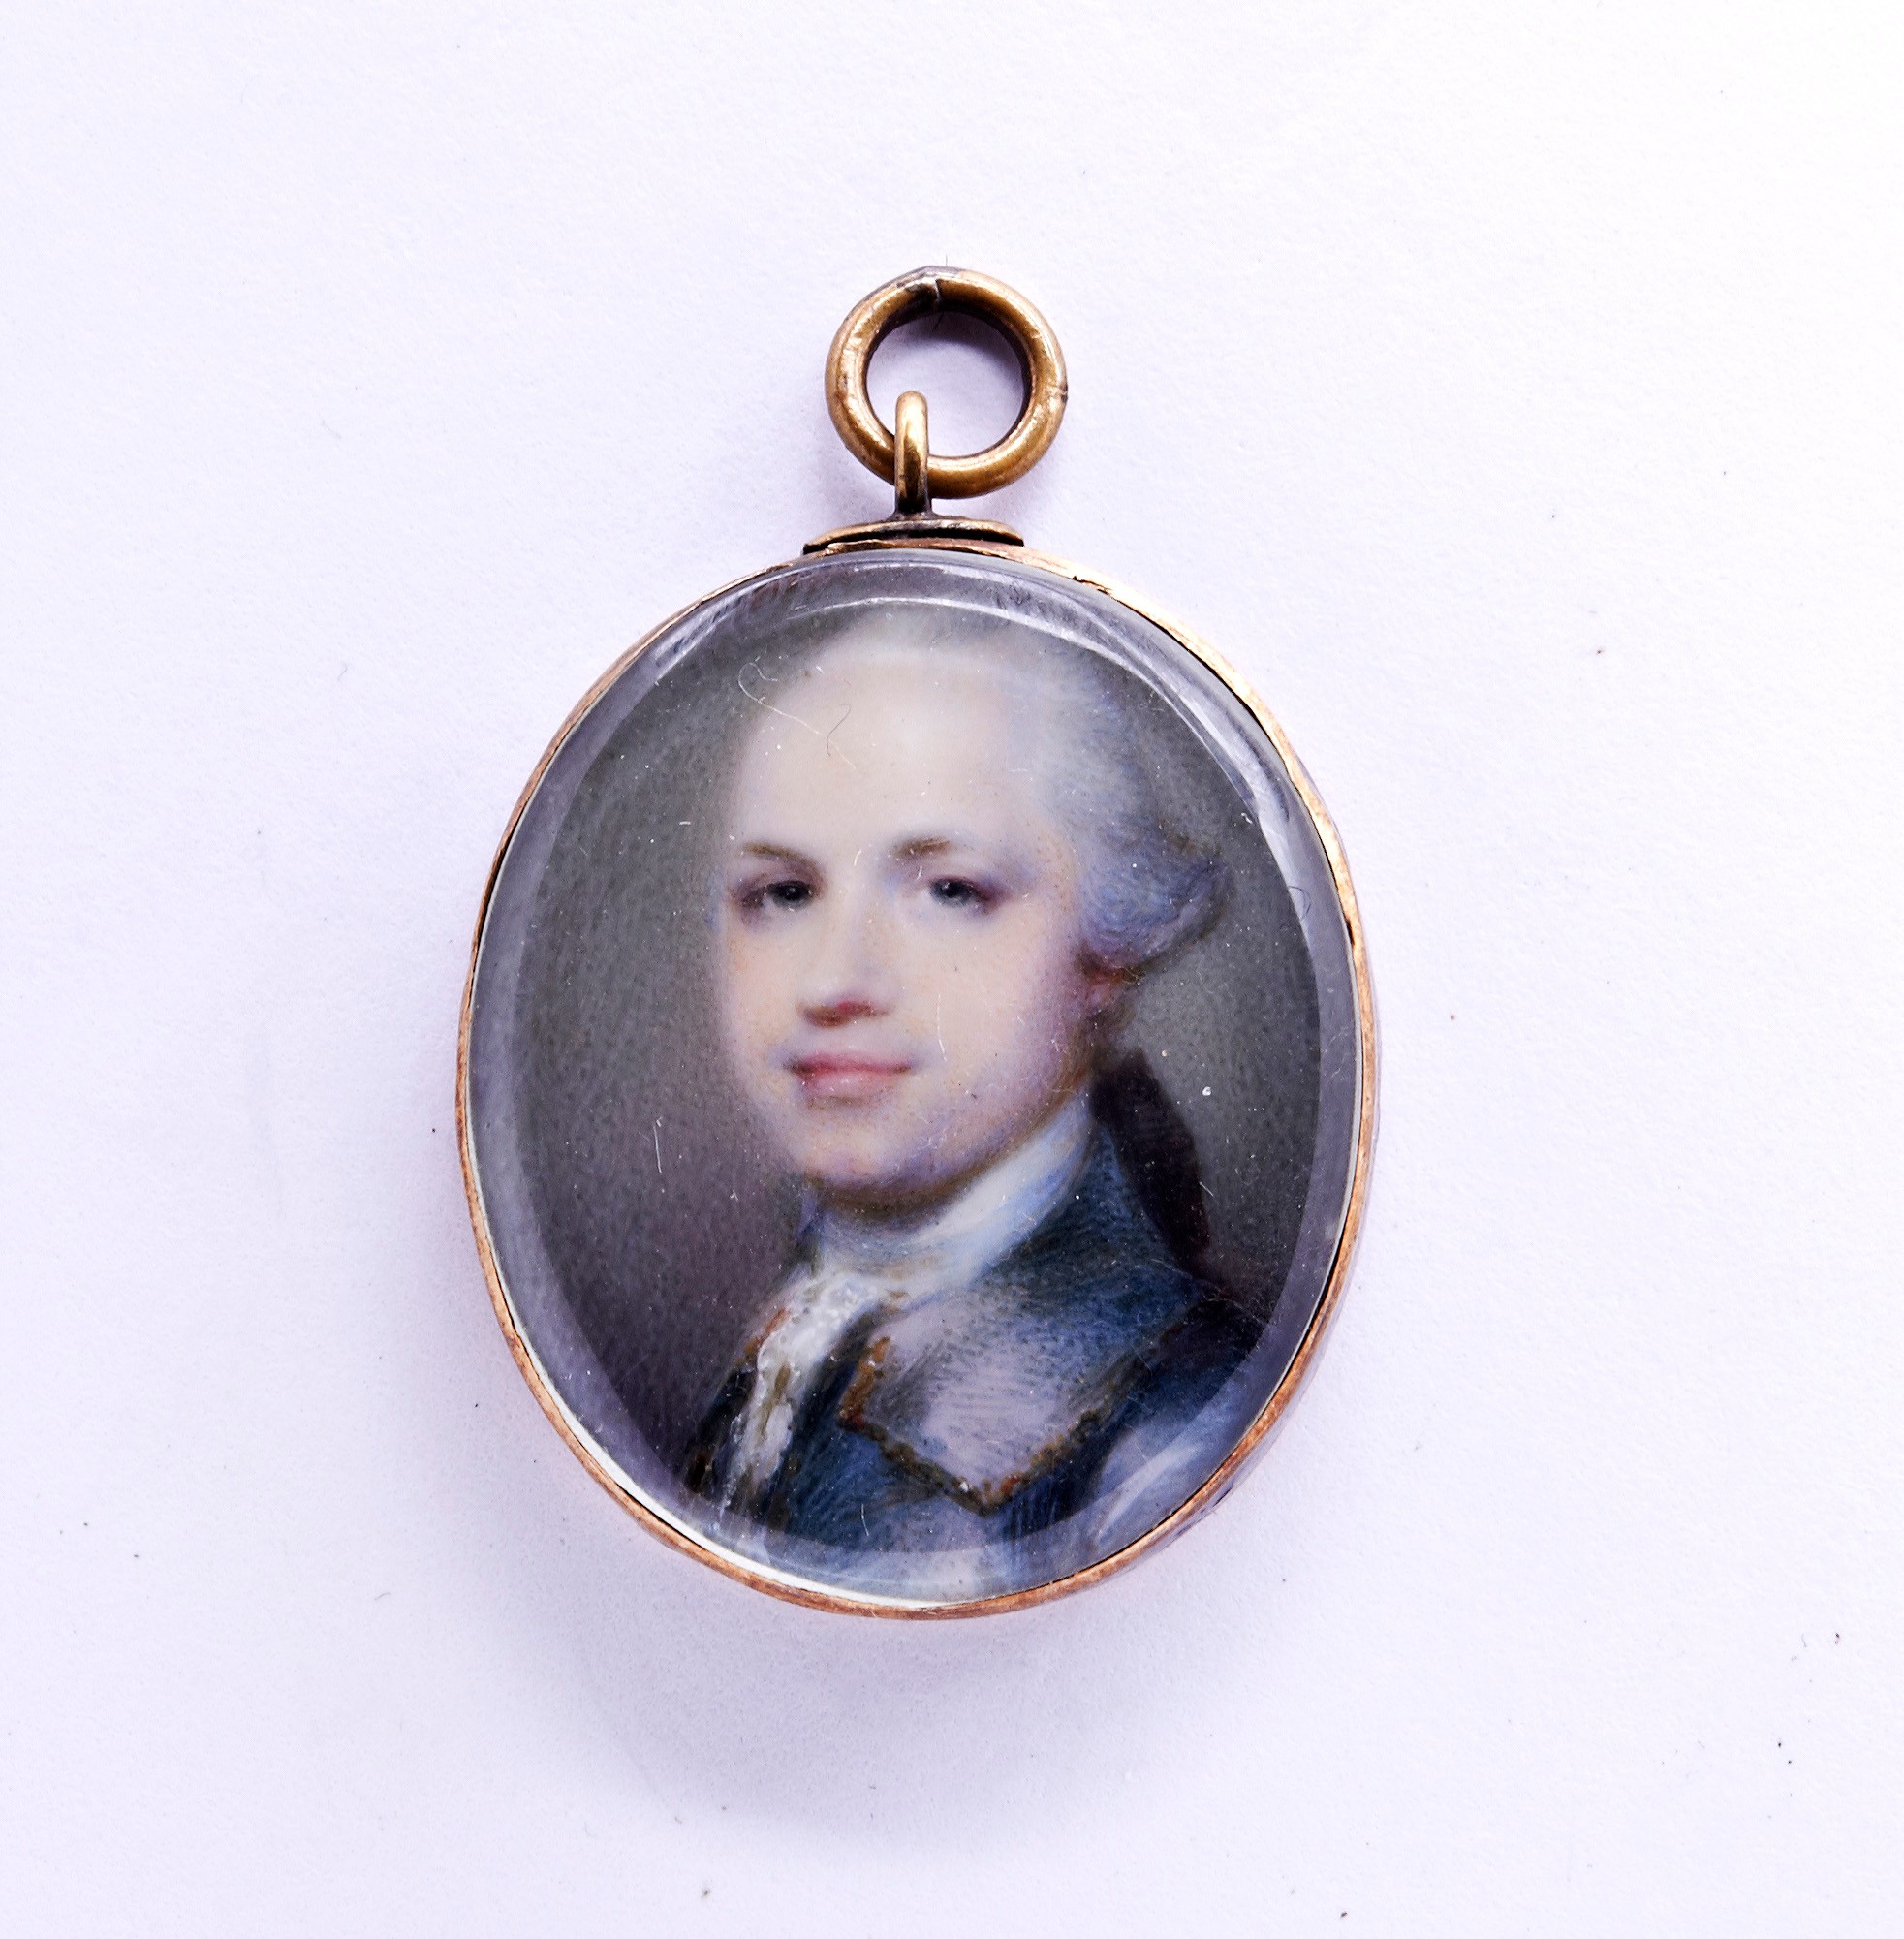 ATTRIBUTED TO JEREMIAH MEYER, LATE 18TH CENTURY, PORTRAIT MINIATURE OF A GENTLEMAN mounted in a